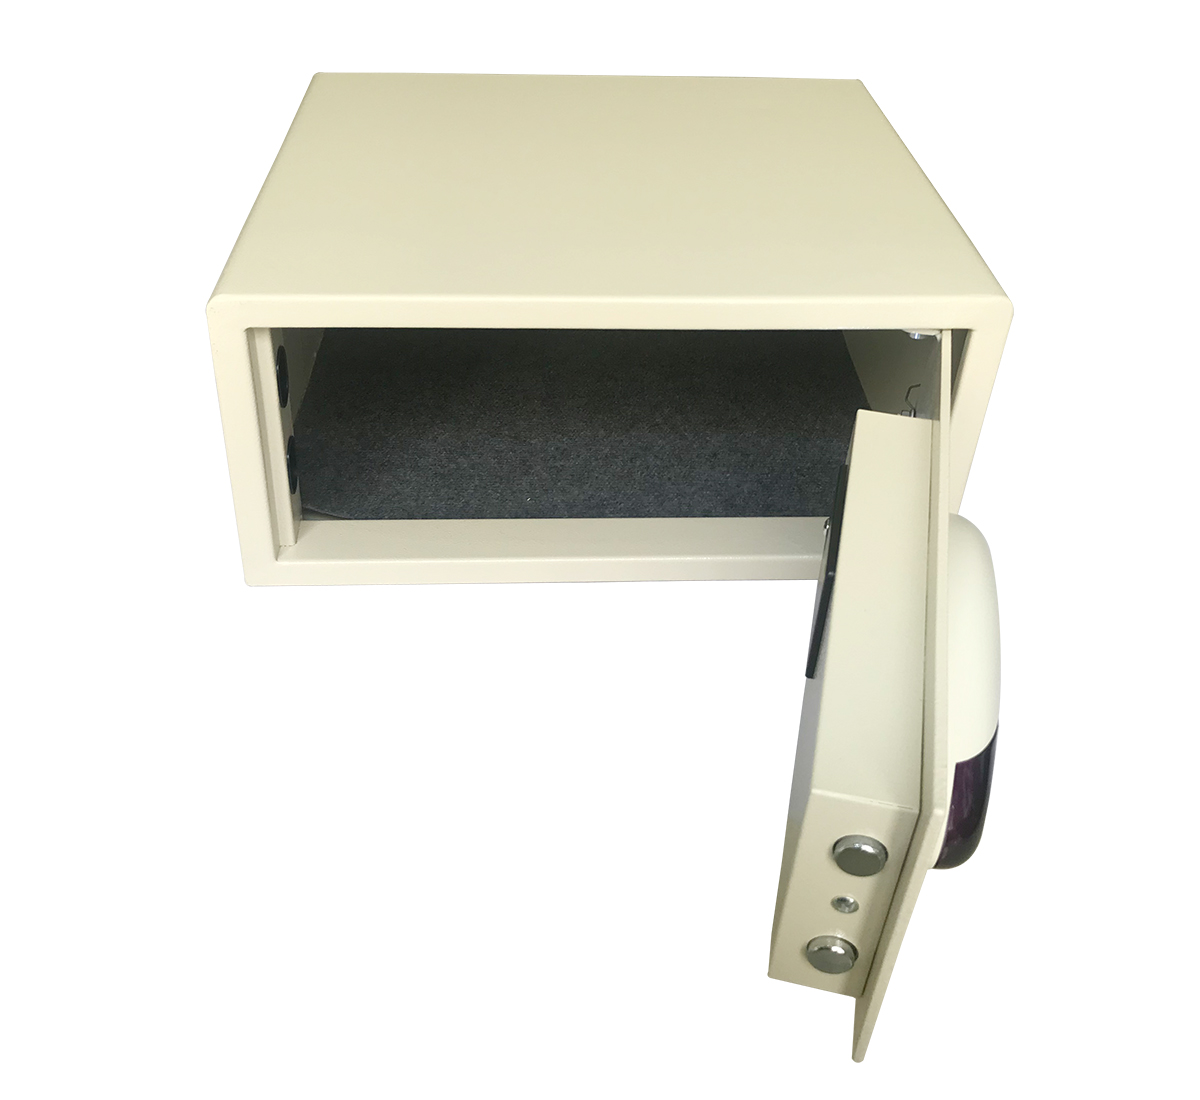 White electric safe with powder coating